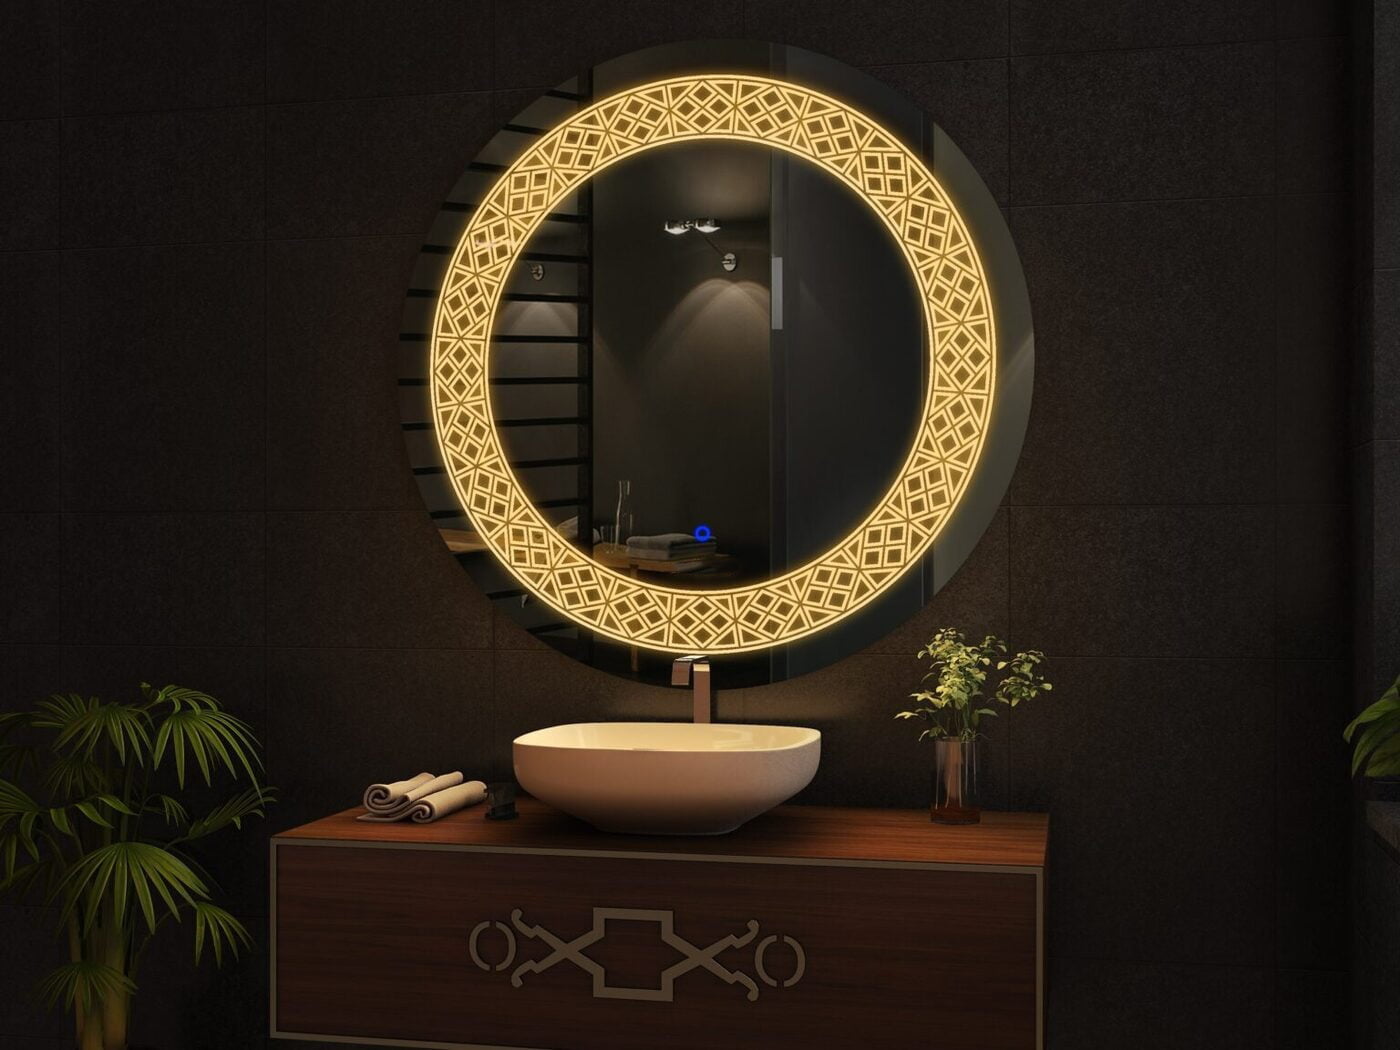 Rounded LED Touch Sensor Mirror - 16" Smart Wall Mirror for Home Decor